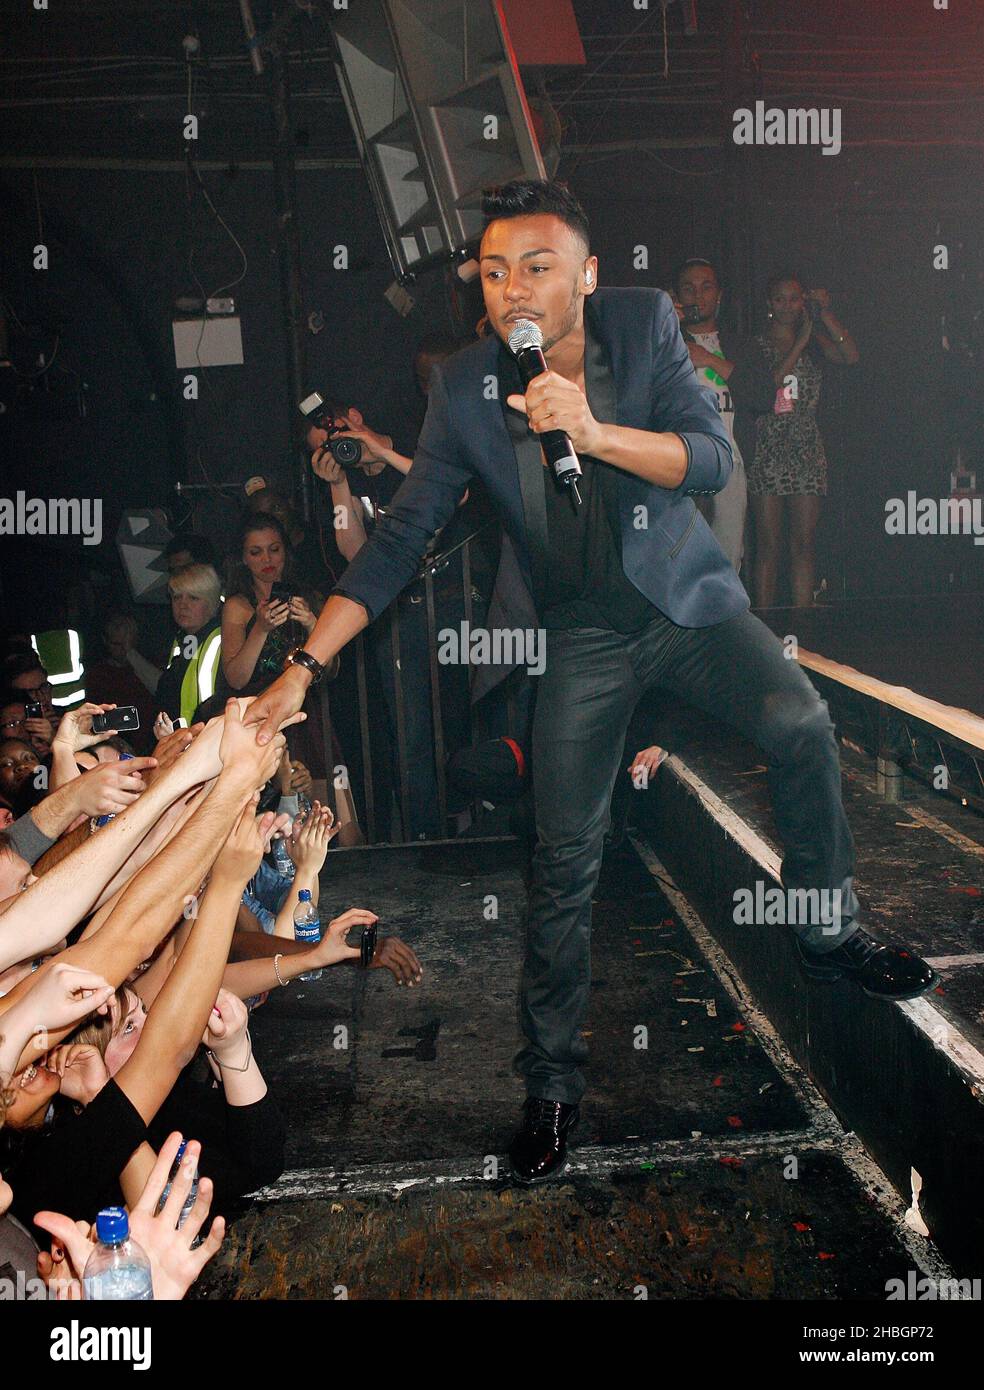 X Factor contestant Marcus Collins performs at G-A-Y Heaven nightclub in London Stock Photo